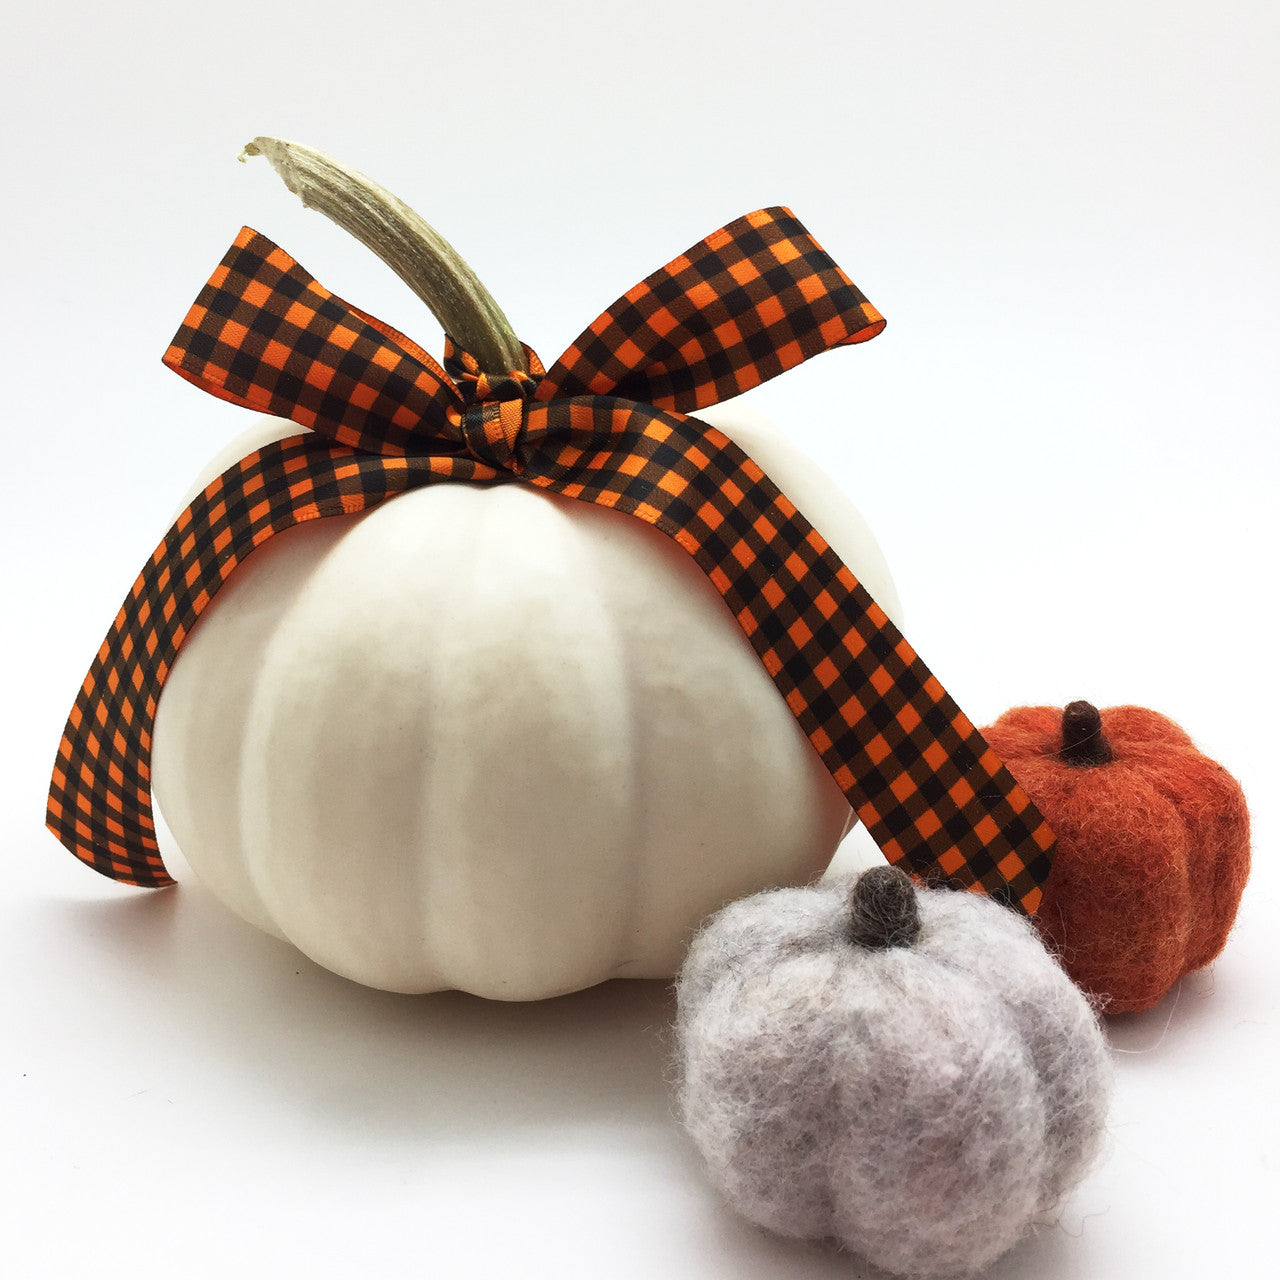 Our 7/8" gingham in orange and black is perfect for Fall decorating!